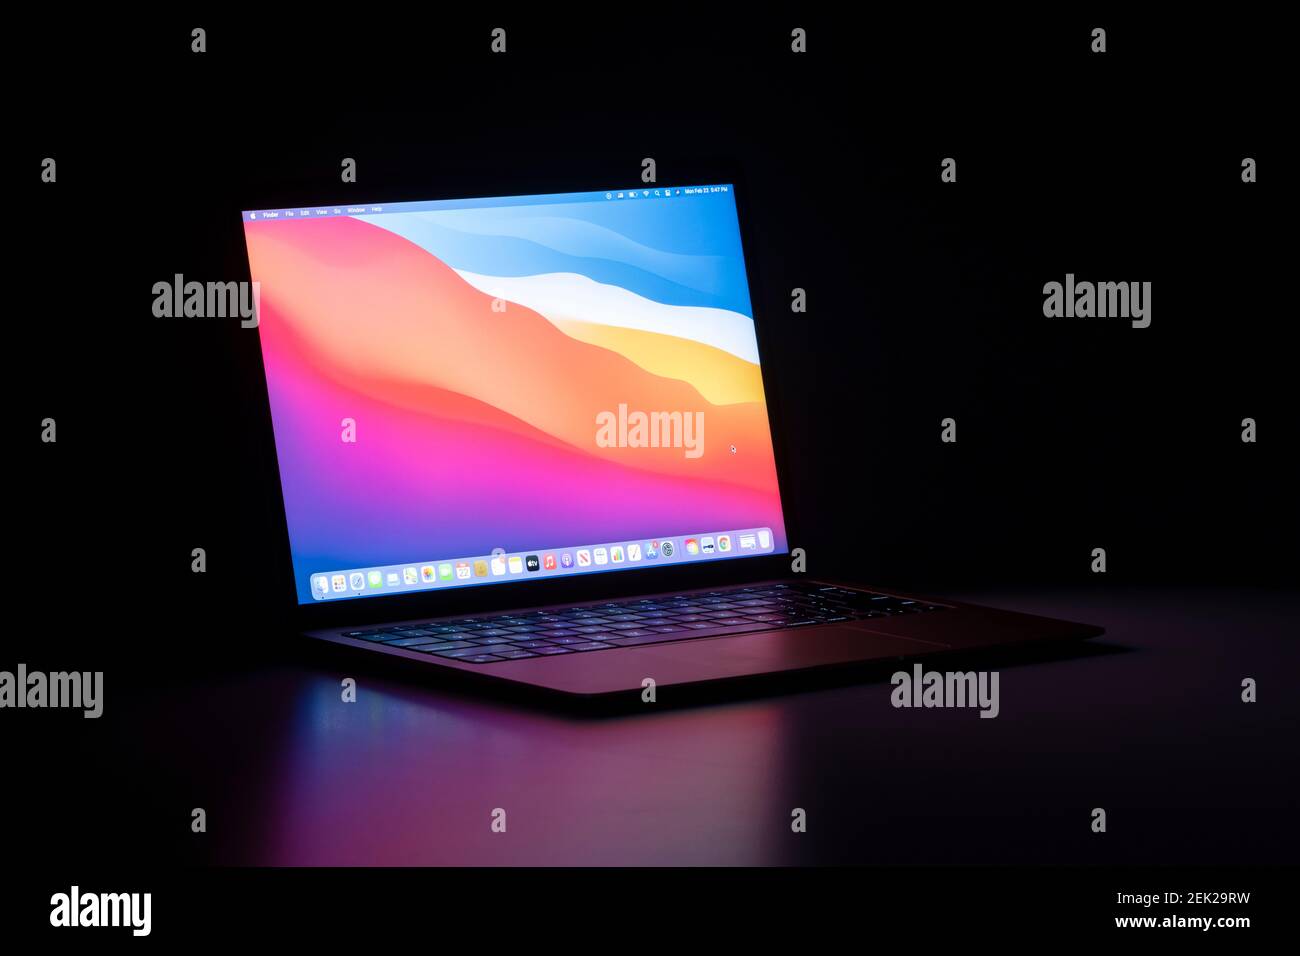 The new MacBook Air with Apple's M1 chip and the latest macOS Big Sur isolated on a desk in the dark. Stock Photo